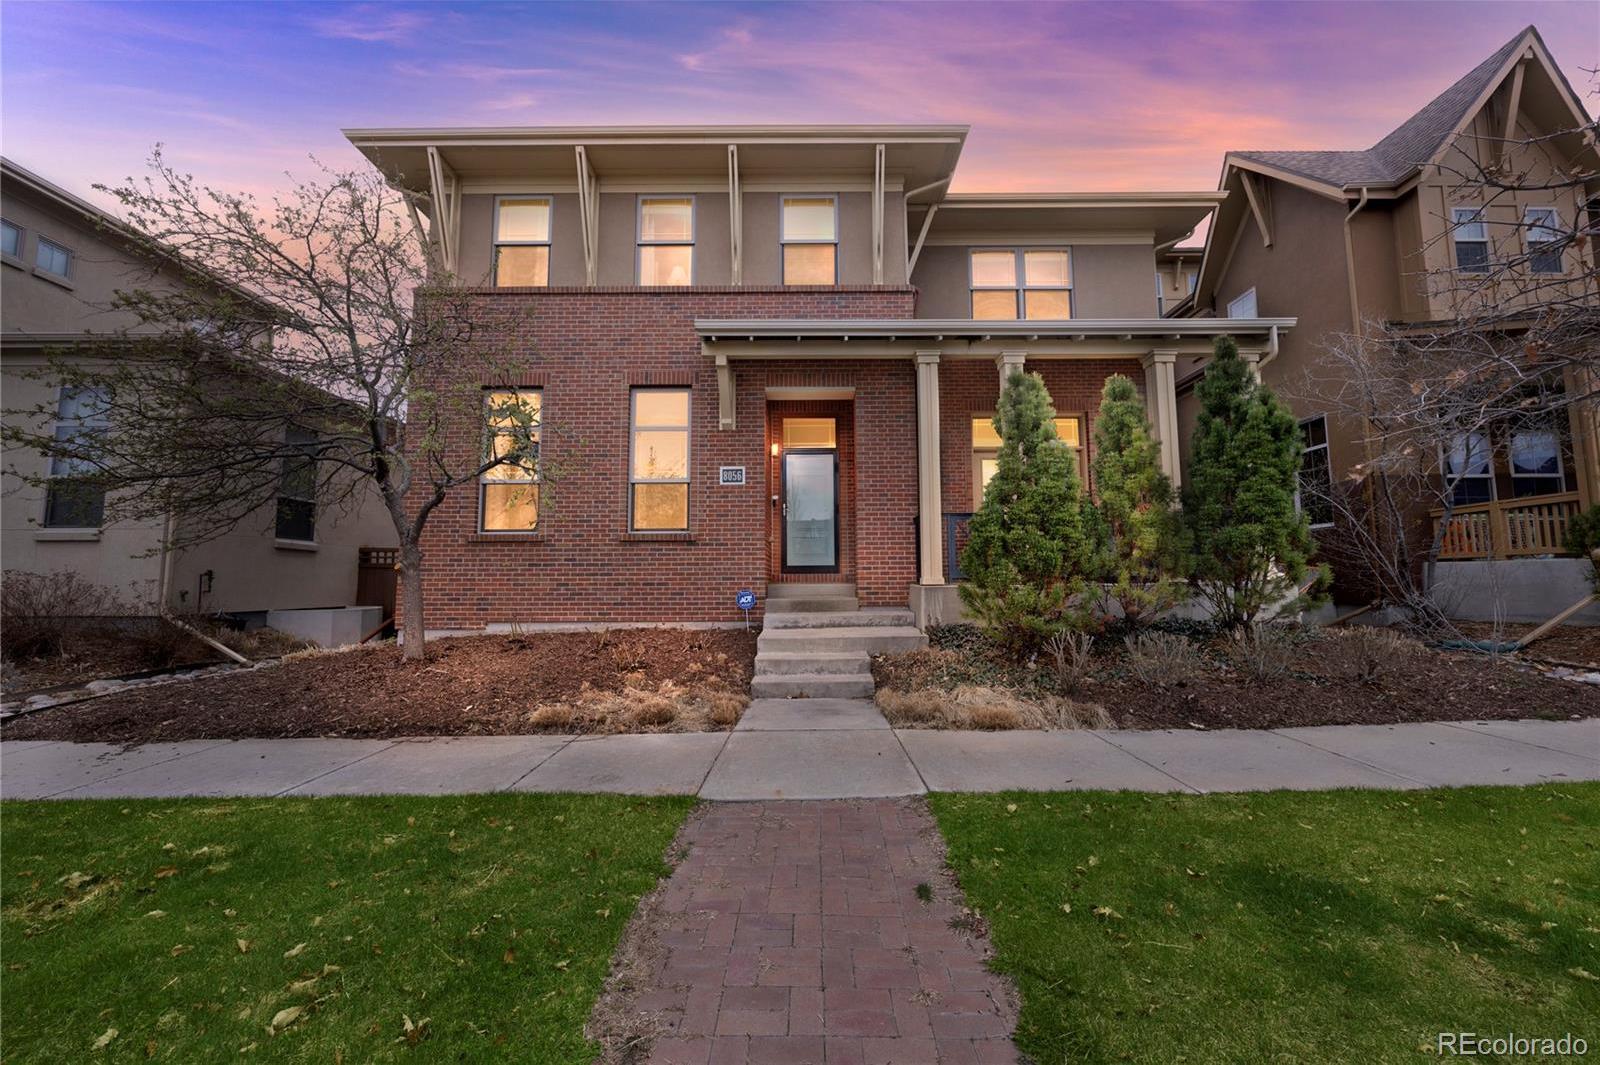 Photo one of 8056 E 24Th Ave Denver CO 80238 | MLS 2370449